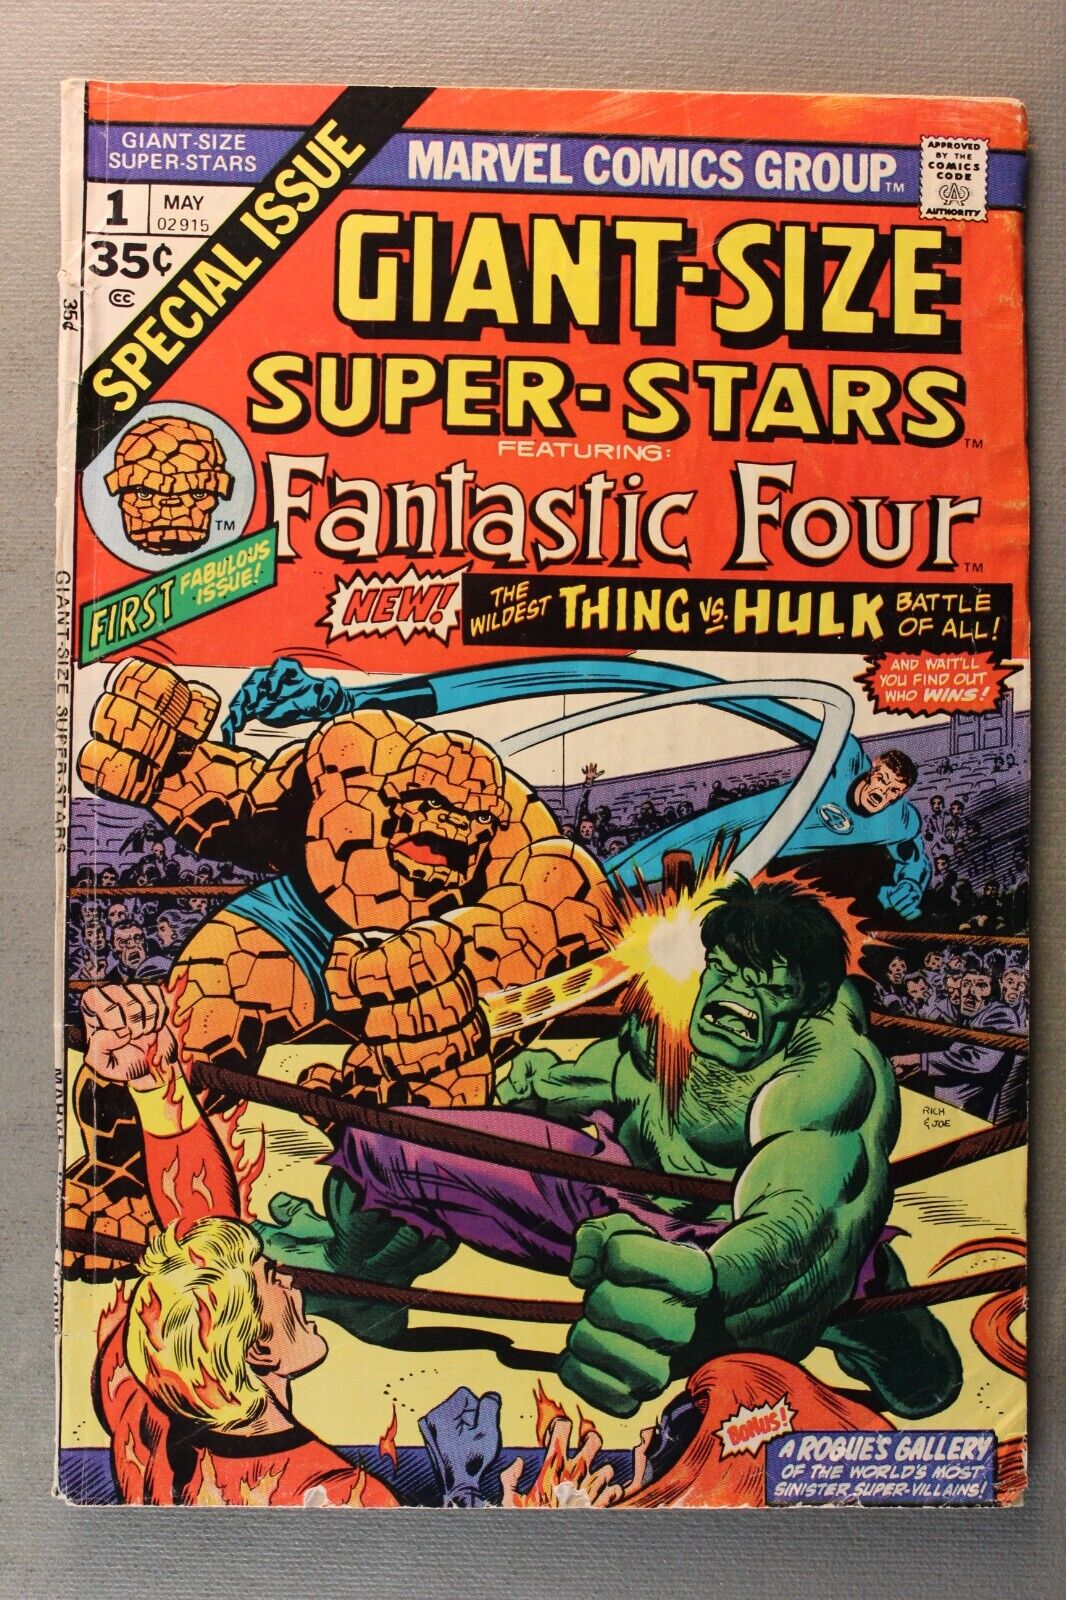 GIANT-SIZE SUPER-STARS #1 Featuring Fantastic Four 